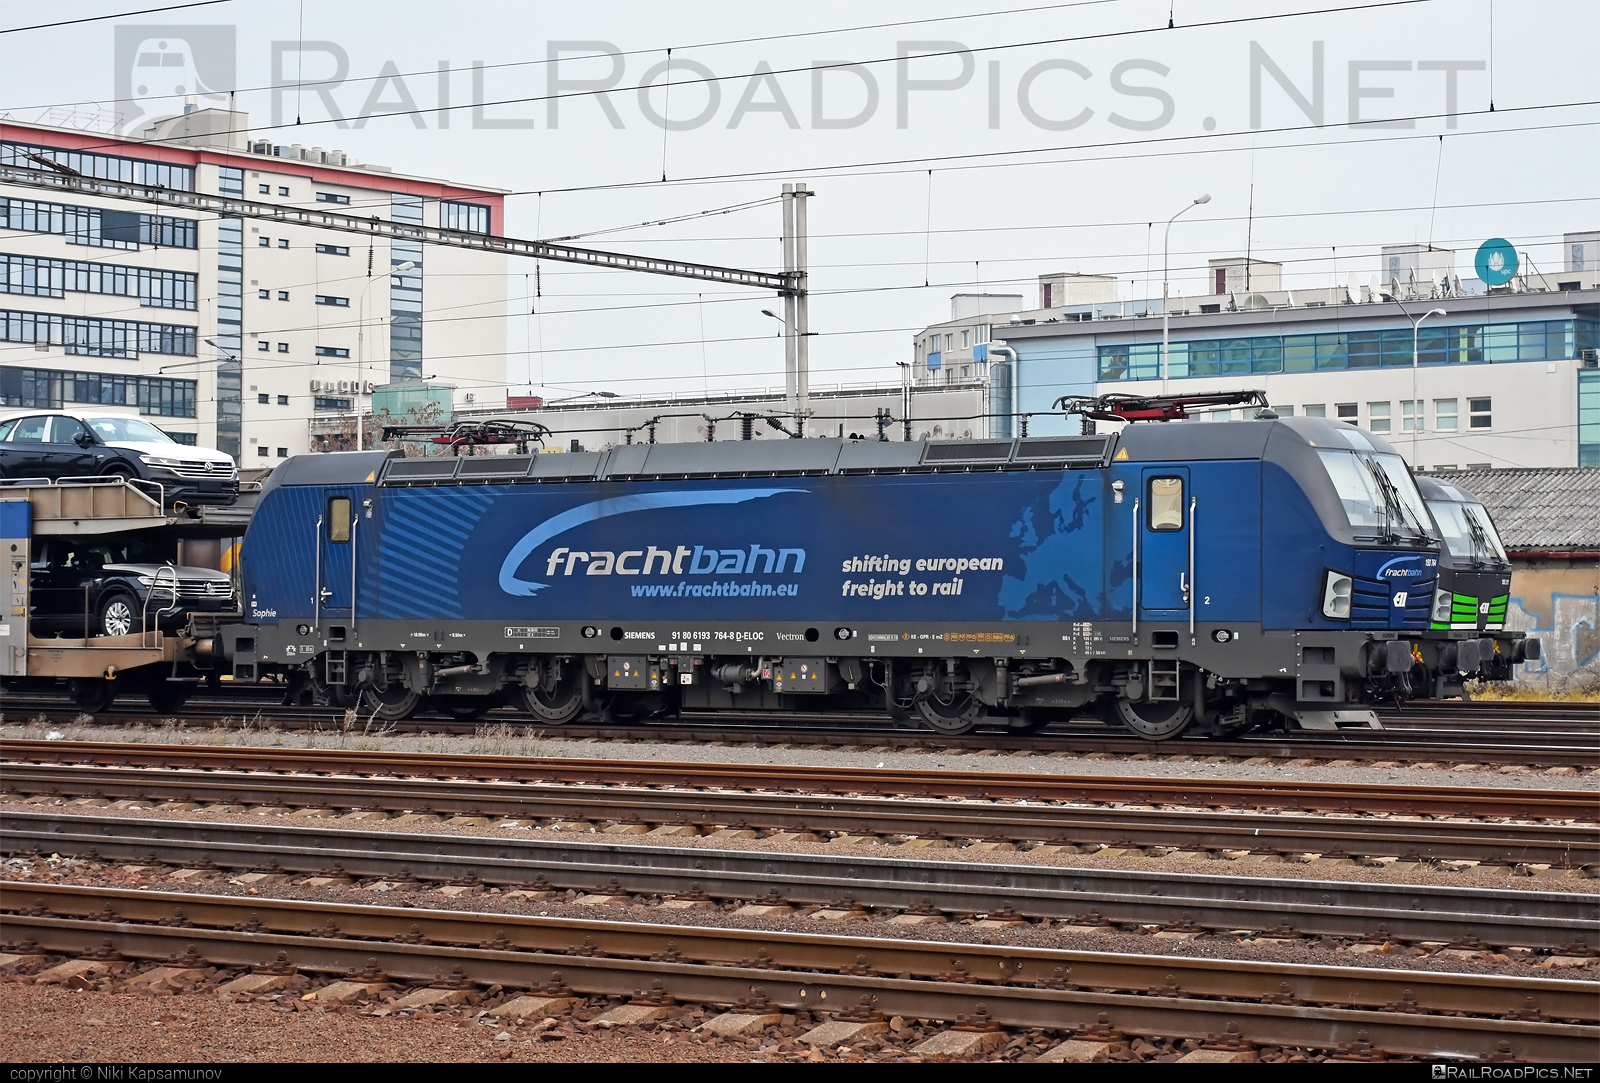 Siemens Vectron MS - 193 764 operated by FRACHTbahn Traktion GmbH #ell #ellgermany #eloc #europeanlocomotiveleasing #frachtbahn #frachtbahntraktion #frachtbahntraktiongmbh #siemens #siemensvectron #siemensvectronms #vectron #vectronms